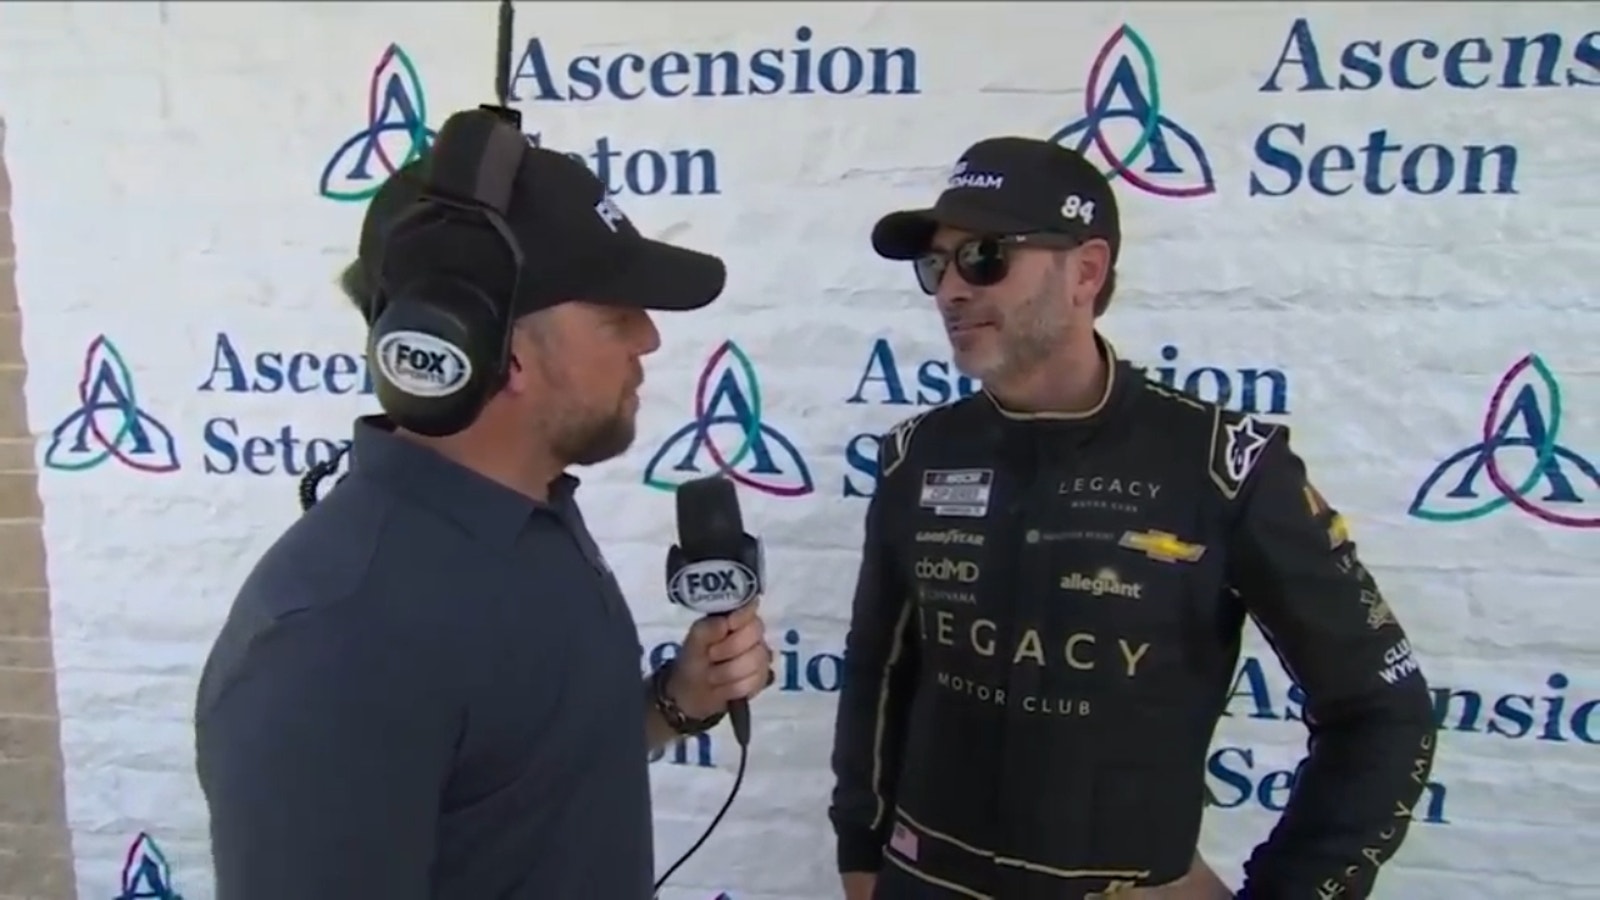 'It's really disappointing' - Jimmie Johnson after an early exit Sunday